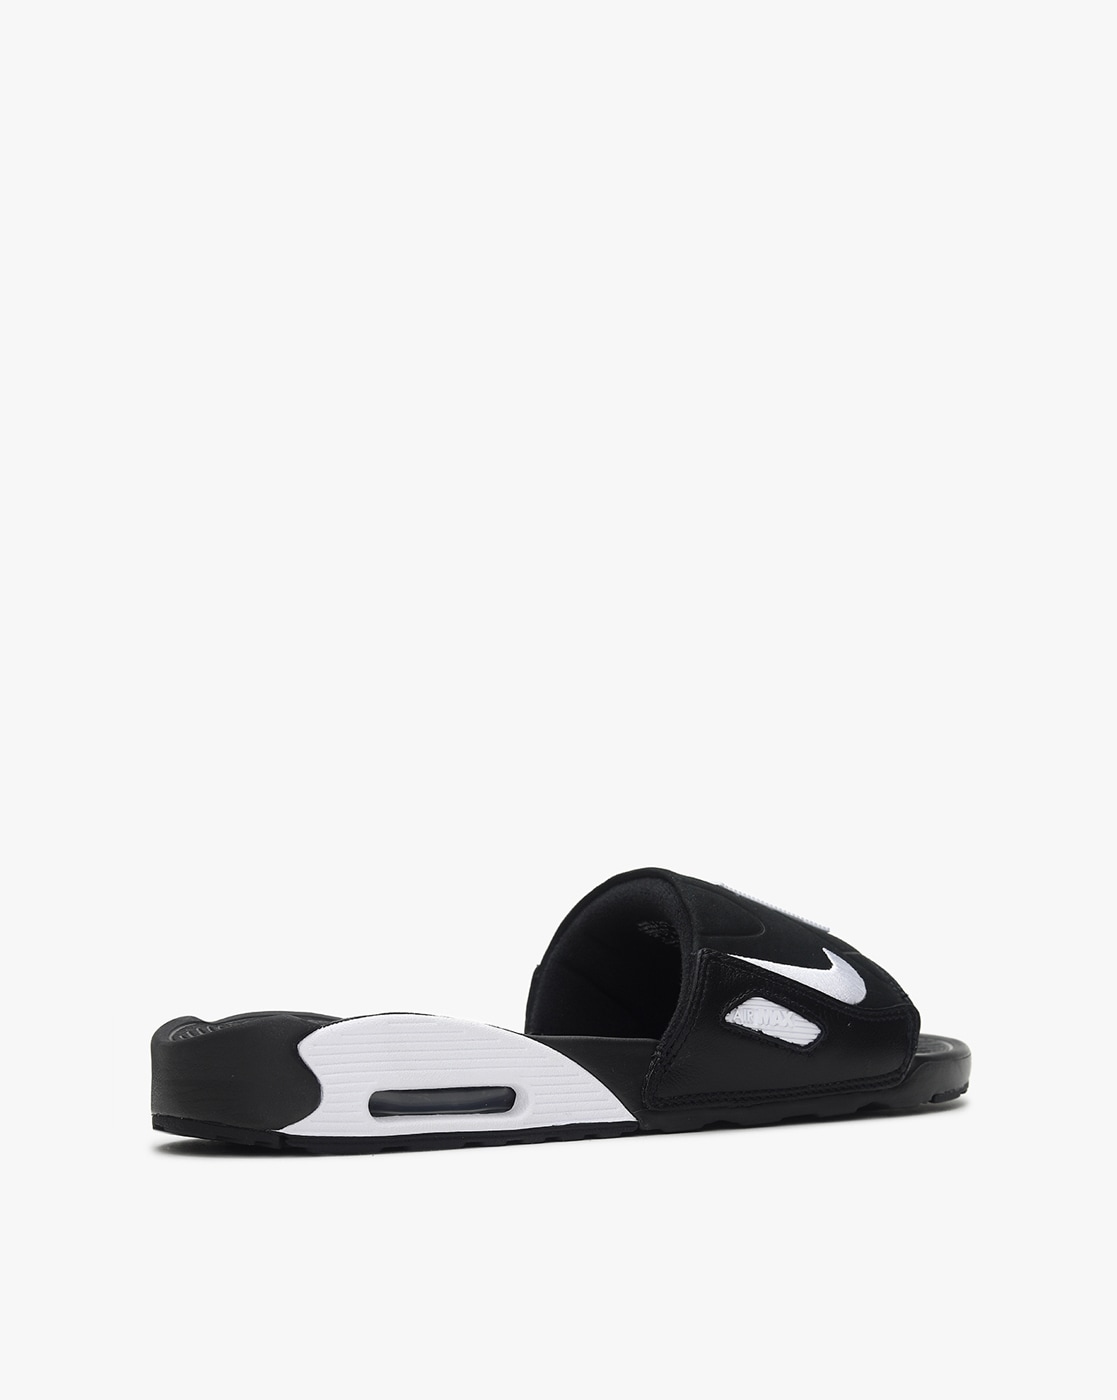 Nike Sandals and Slippers Styles, Prices - Trendyol